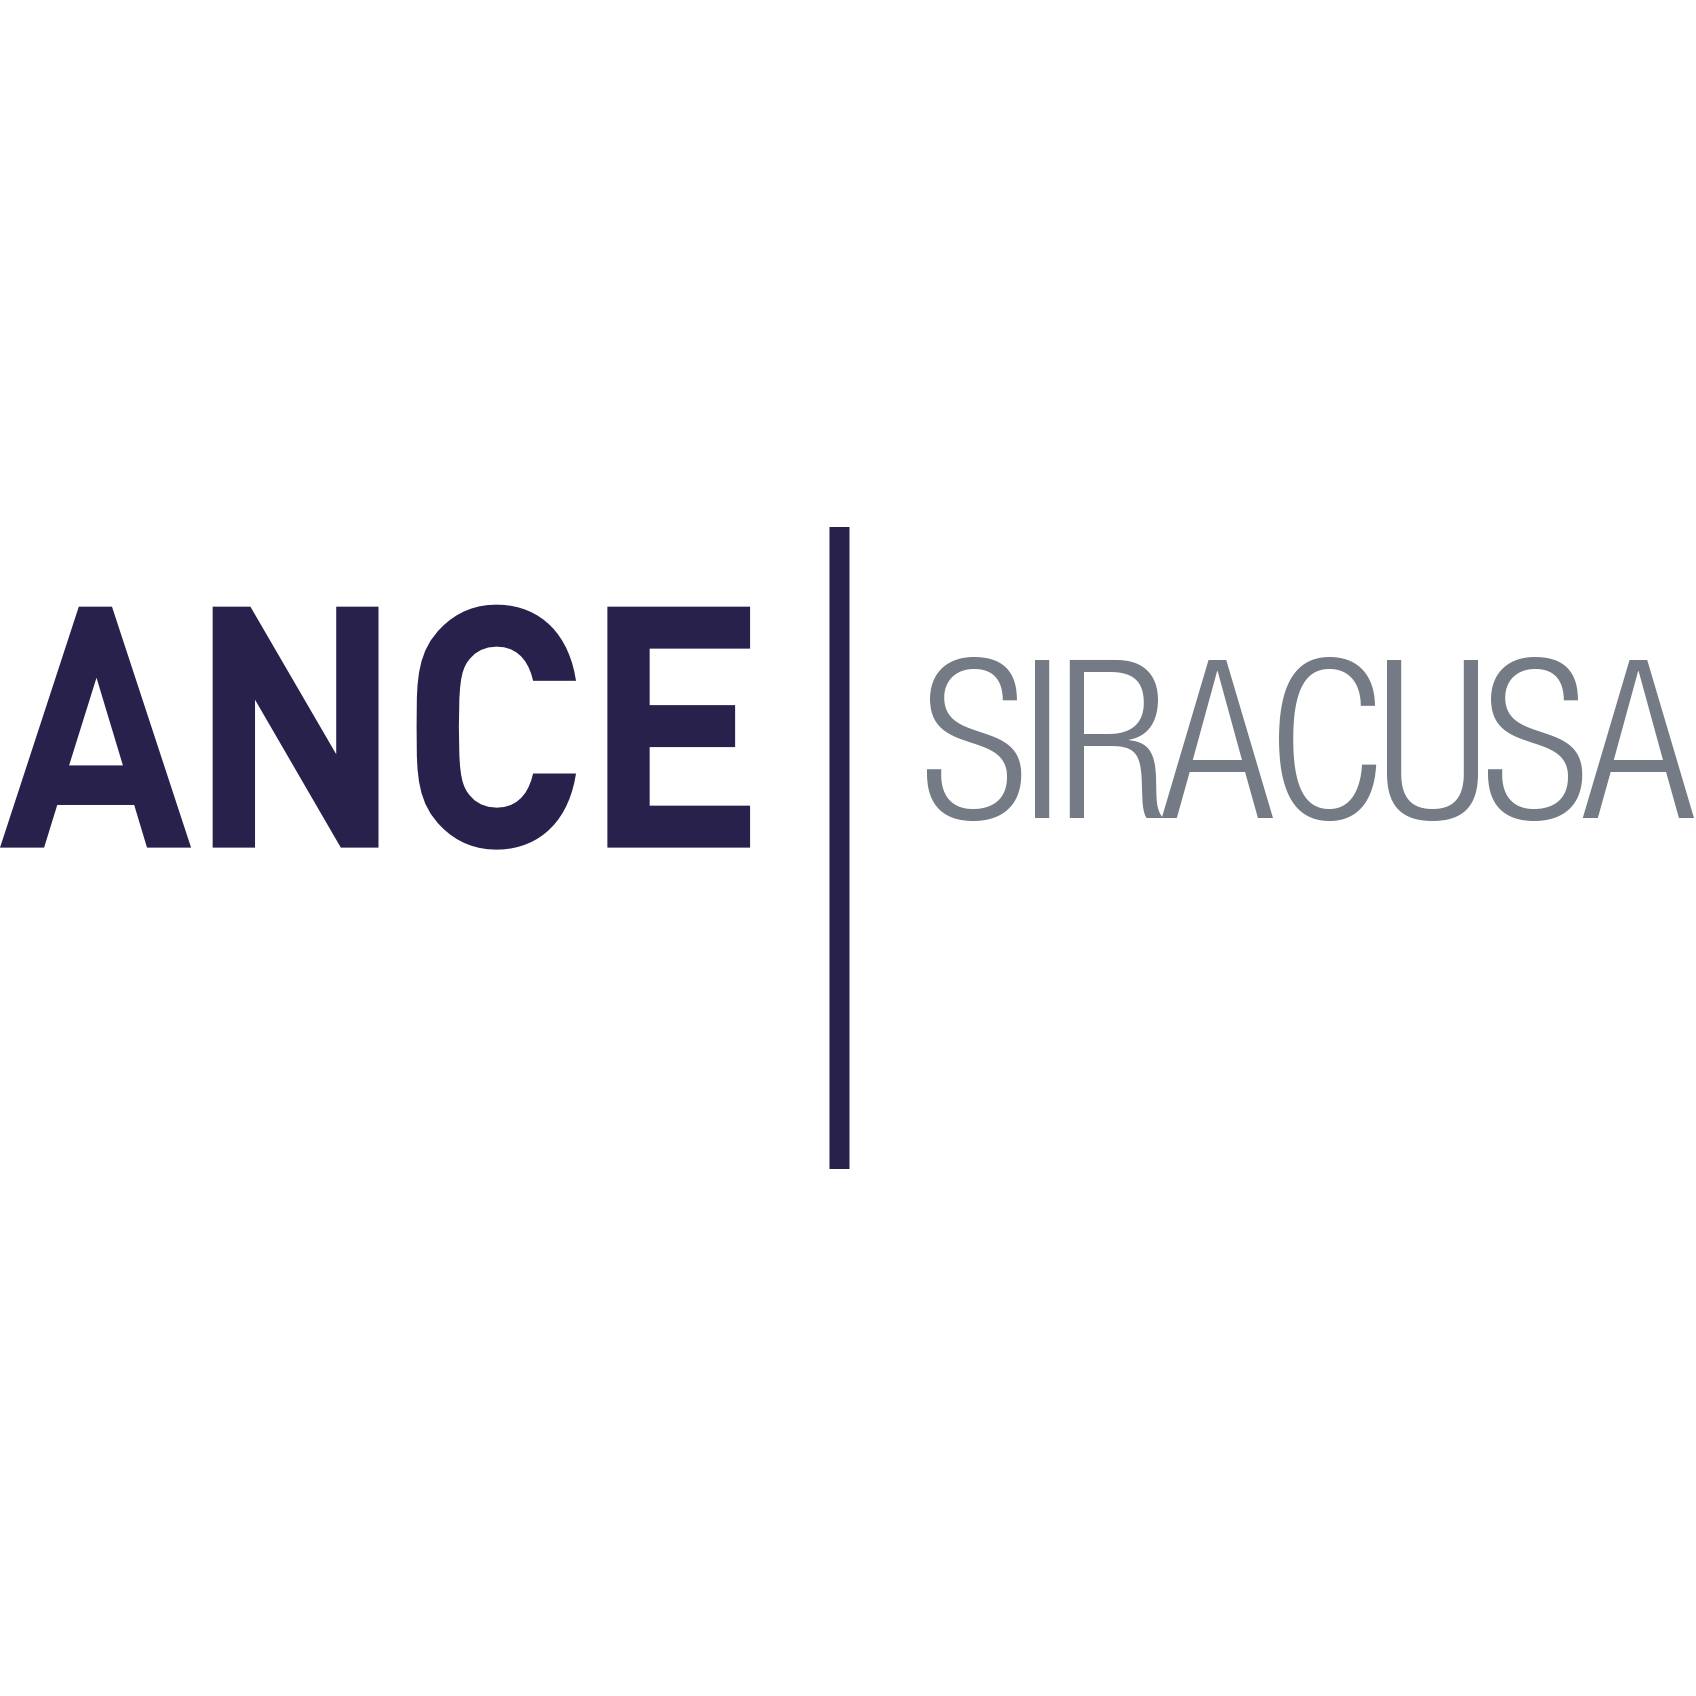 PAOLO AUGLIERA, SOLE DIRECTOR OF SOLESI SPA, ELECTED PRESIDENT OF ANCE SIRACUSA